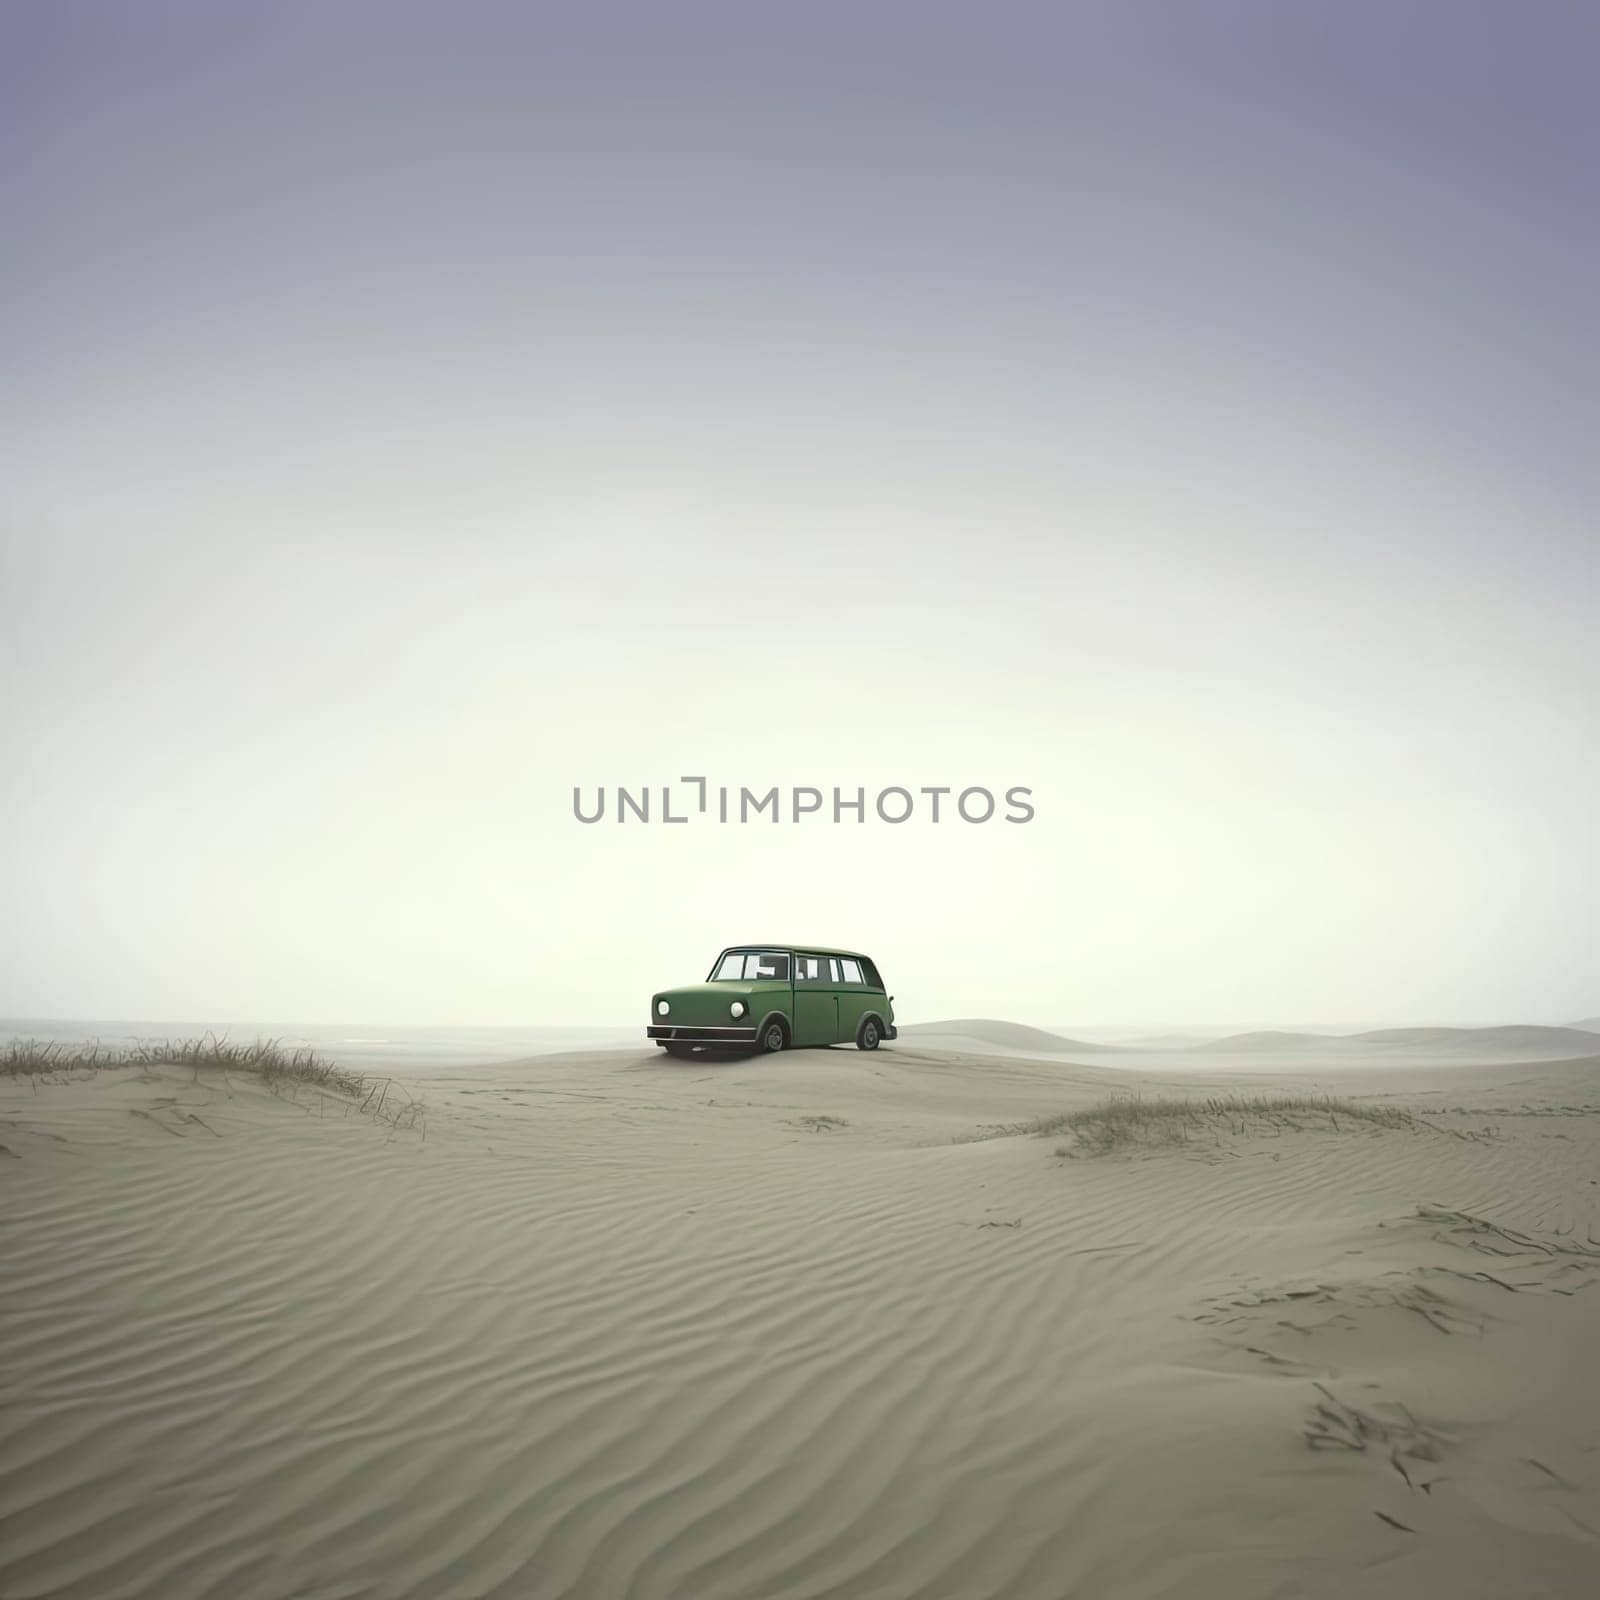 Car in the sand dunes of the desert (ID: 001460)